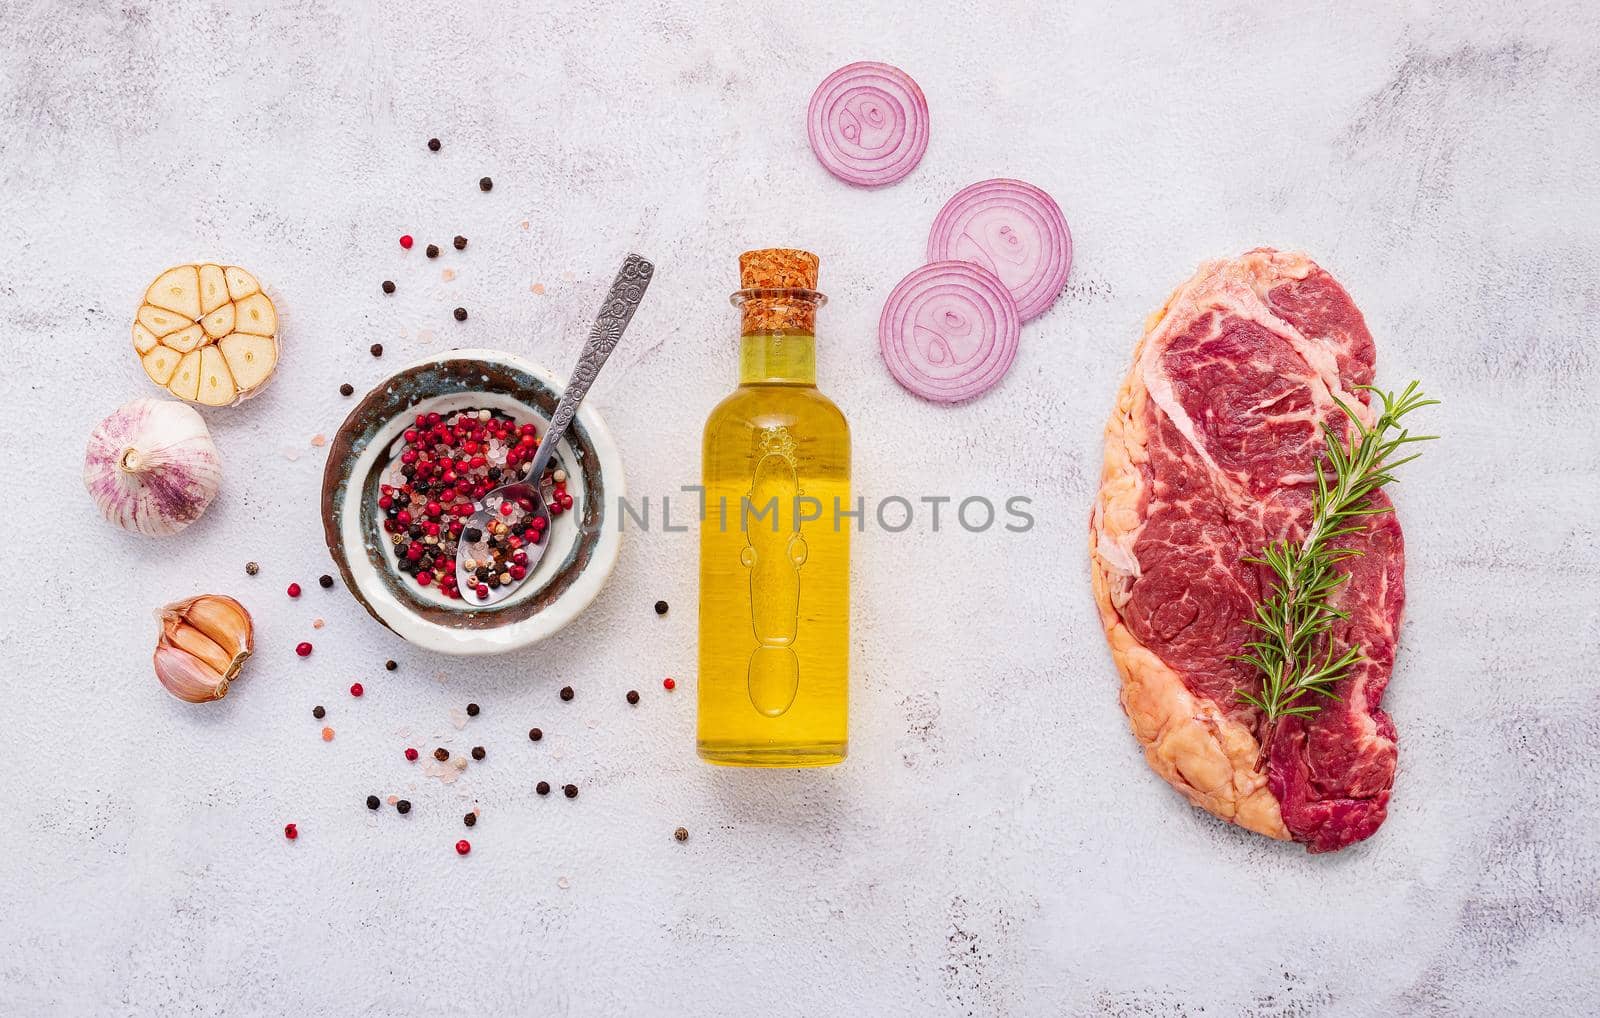 Raw Striplion Steak set up on white concrete background. Flat Lay of fresh raw beef steak with rosemary and spice on white shabby concrete background top view.